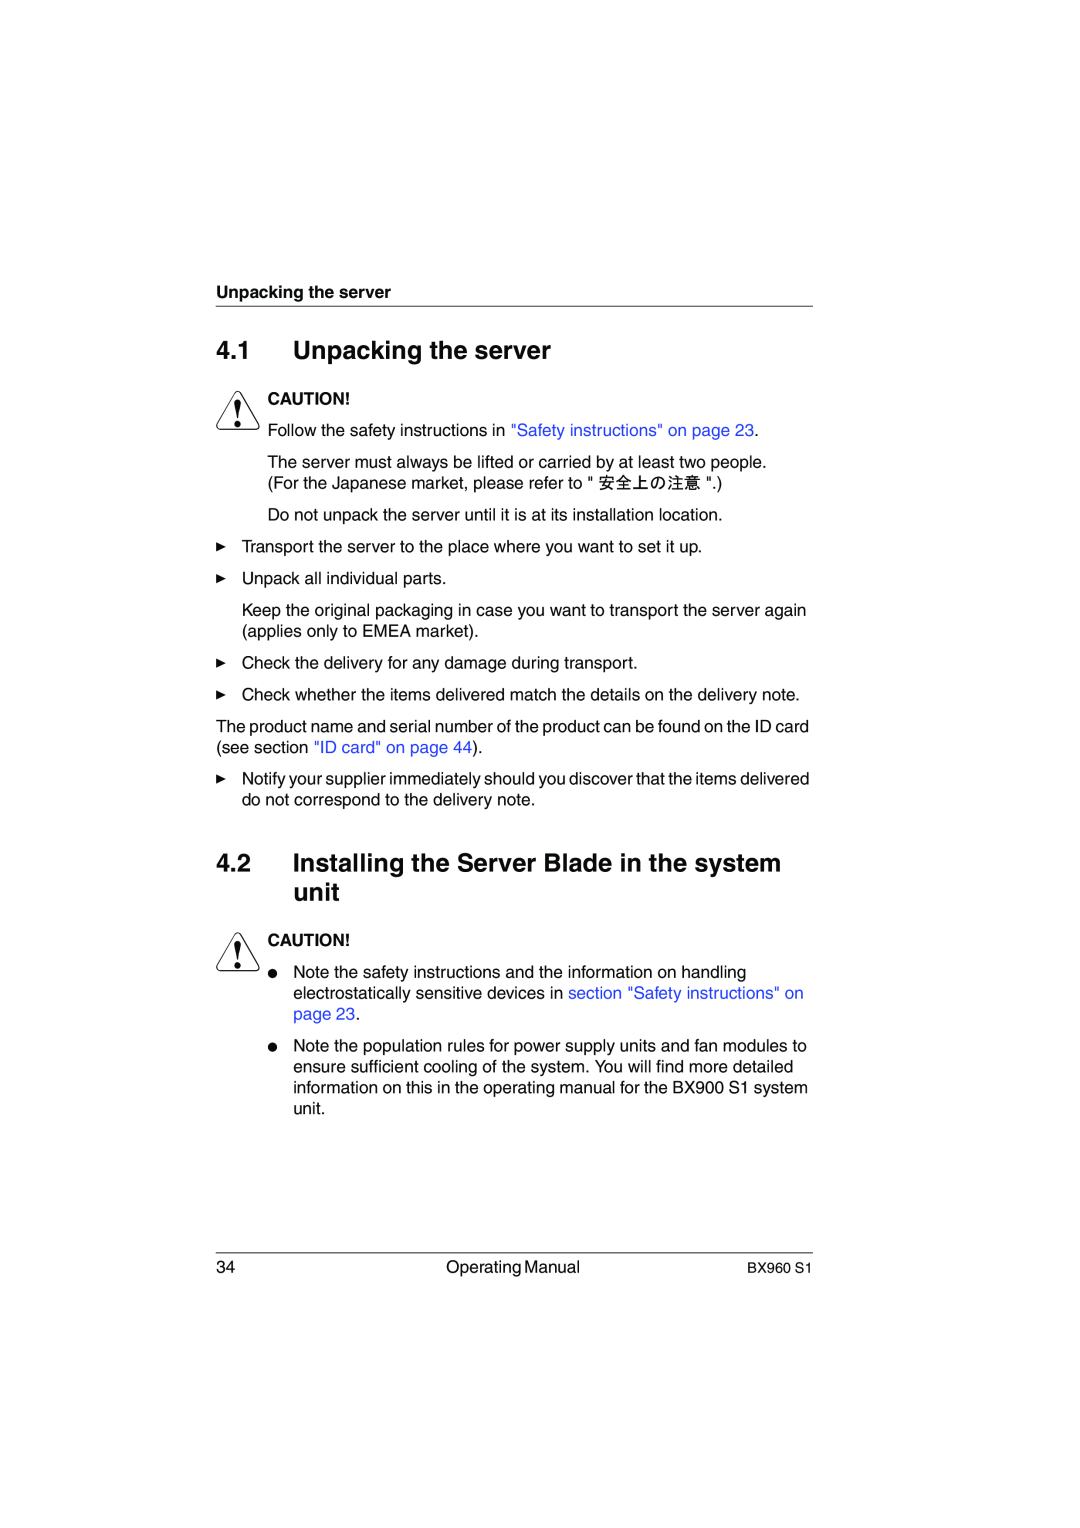 Fujitsu BX960 S1 manual Unpacking the server, Installing the Server Blade in the system unit, V Caution 